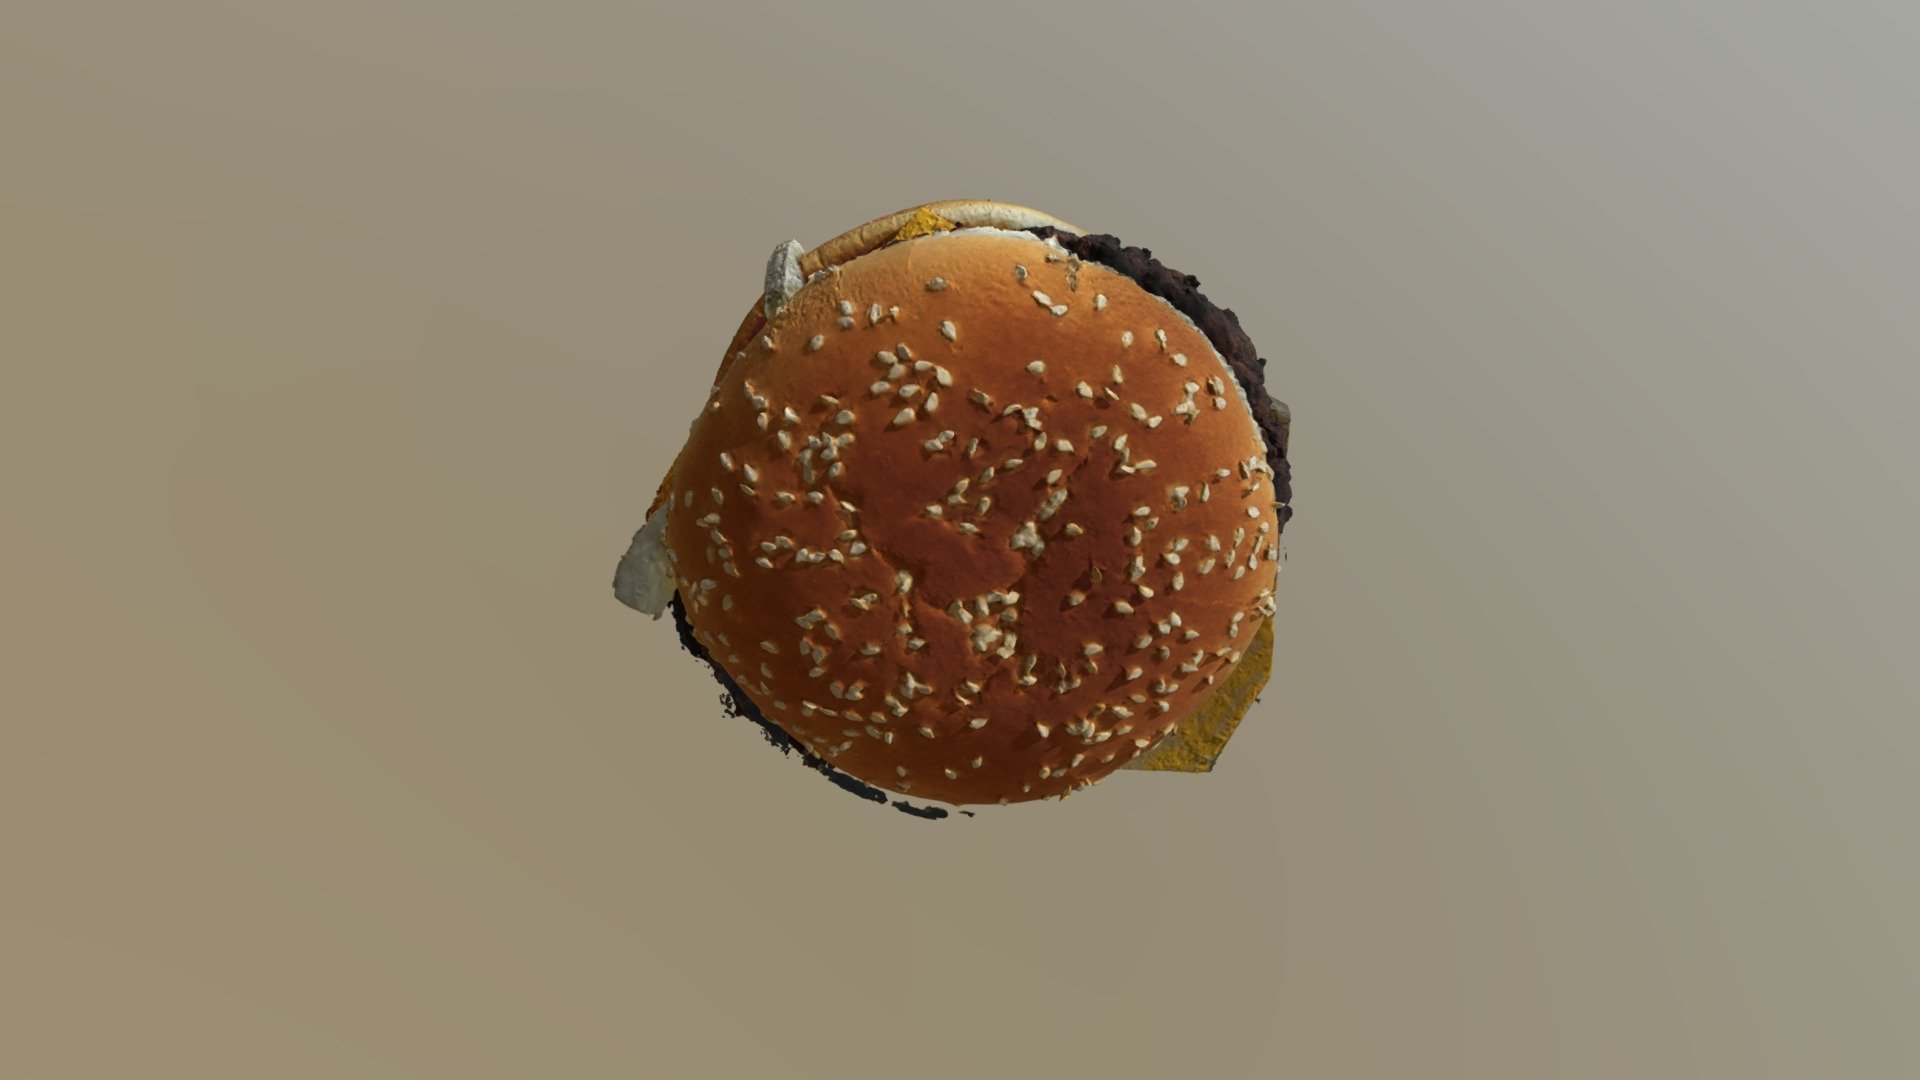 Quarter Pounder With Cheese OBJ File